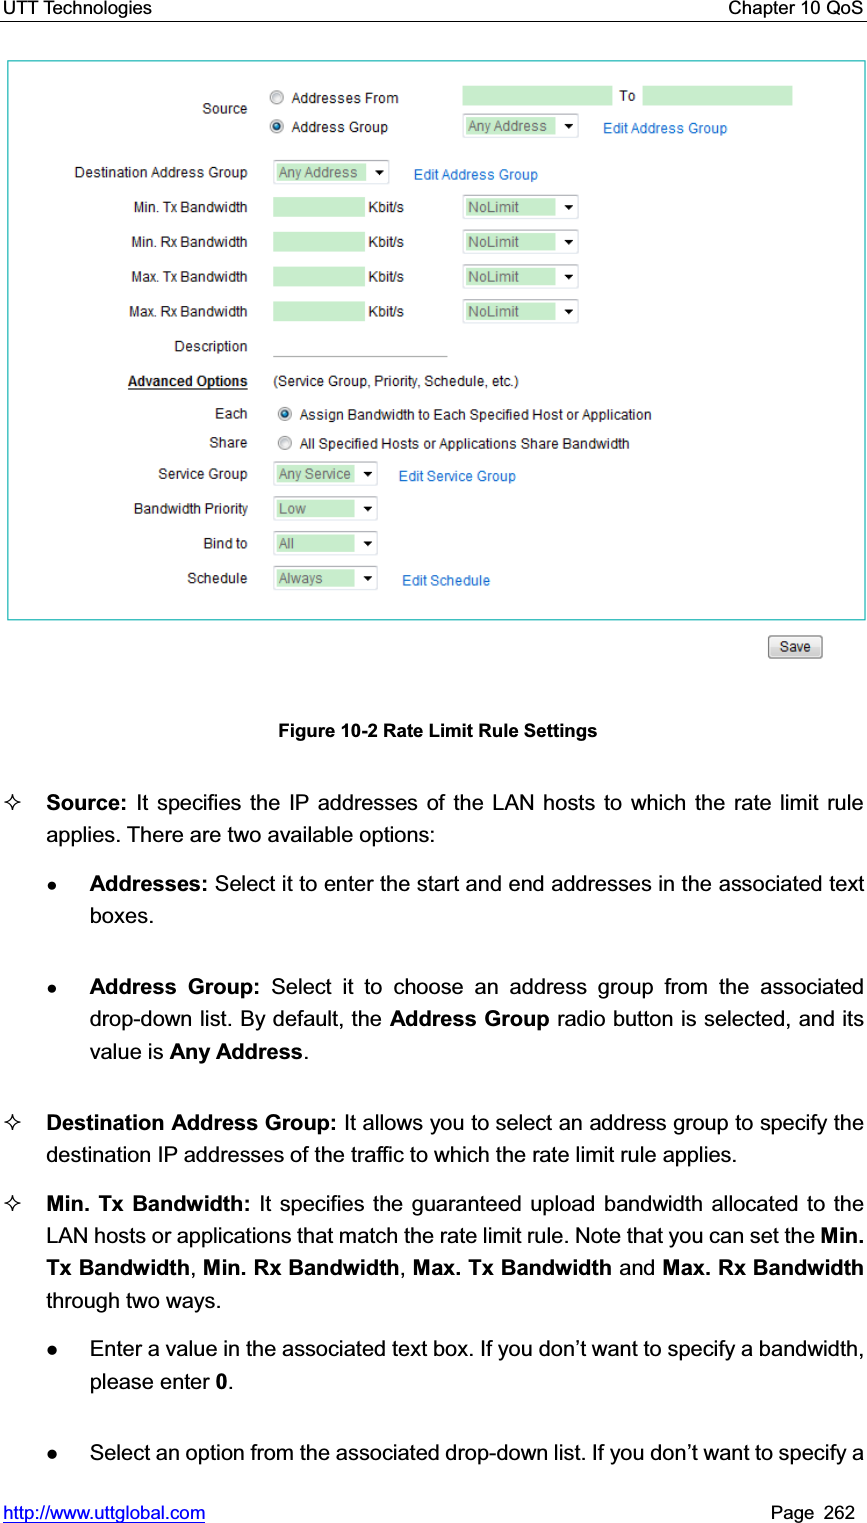 UTT Technologies    Chapter 10 QoS   http://www.uttglobal.com Page 262   Figure 10-2 Rate Limit Rule Settings Source: It specifies the IP addresses of the LAN hosts to which the rate limit rule applies. There are two available options:ƔAddresses: Select it to enter the start and end addresses in the associated text boxes. ƔAddress Group: Select it to choose an address group from the associated drop-down list. By default, the Address Group radio button is selected, and its value is Any Address.Destination Address Group: It allows you to select an address group to specify the destination IP addresses of the traffic to which the rate limit rule applies.Min. Tx Bandwidth: It specifies the guaranteed upload bandwidth allocated to the LAN hosts or applications that match the rate limit rule. Note that you can set the Min. Tx Bandwidth,Min. Rx Bandwidth, Max. Tx Bandwidth and Max. Rx Bandwidth through two ways. zEnter a value in the associated text box. If you GRQ¶t want to specify a bandwidth, please enter 0.zSelect an option from the associated drop-down list. If you don¶t want to specify a 